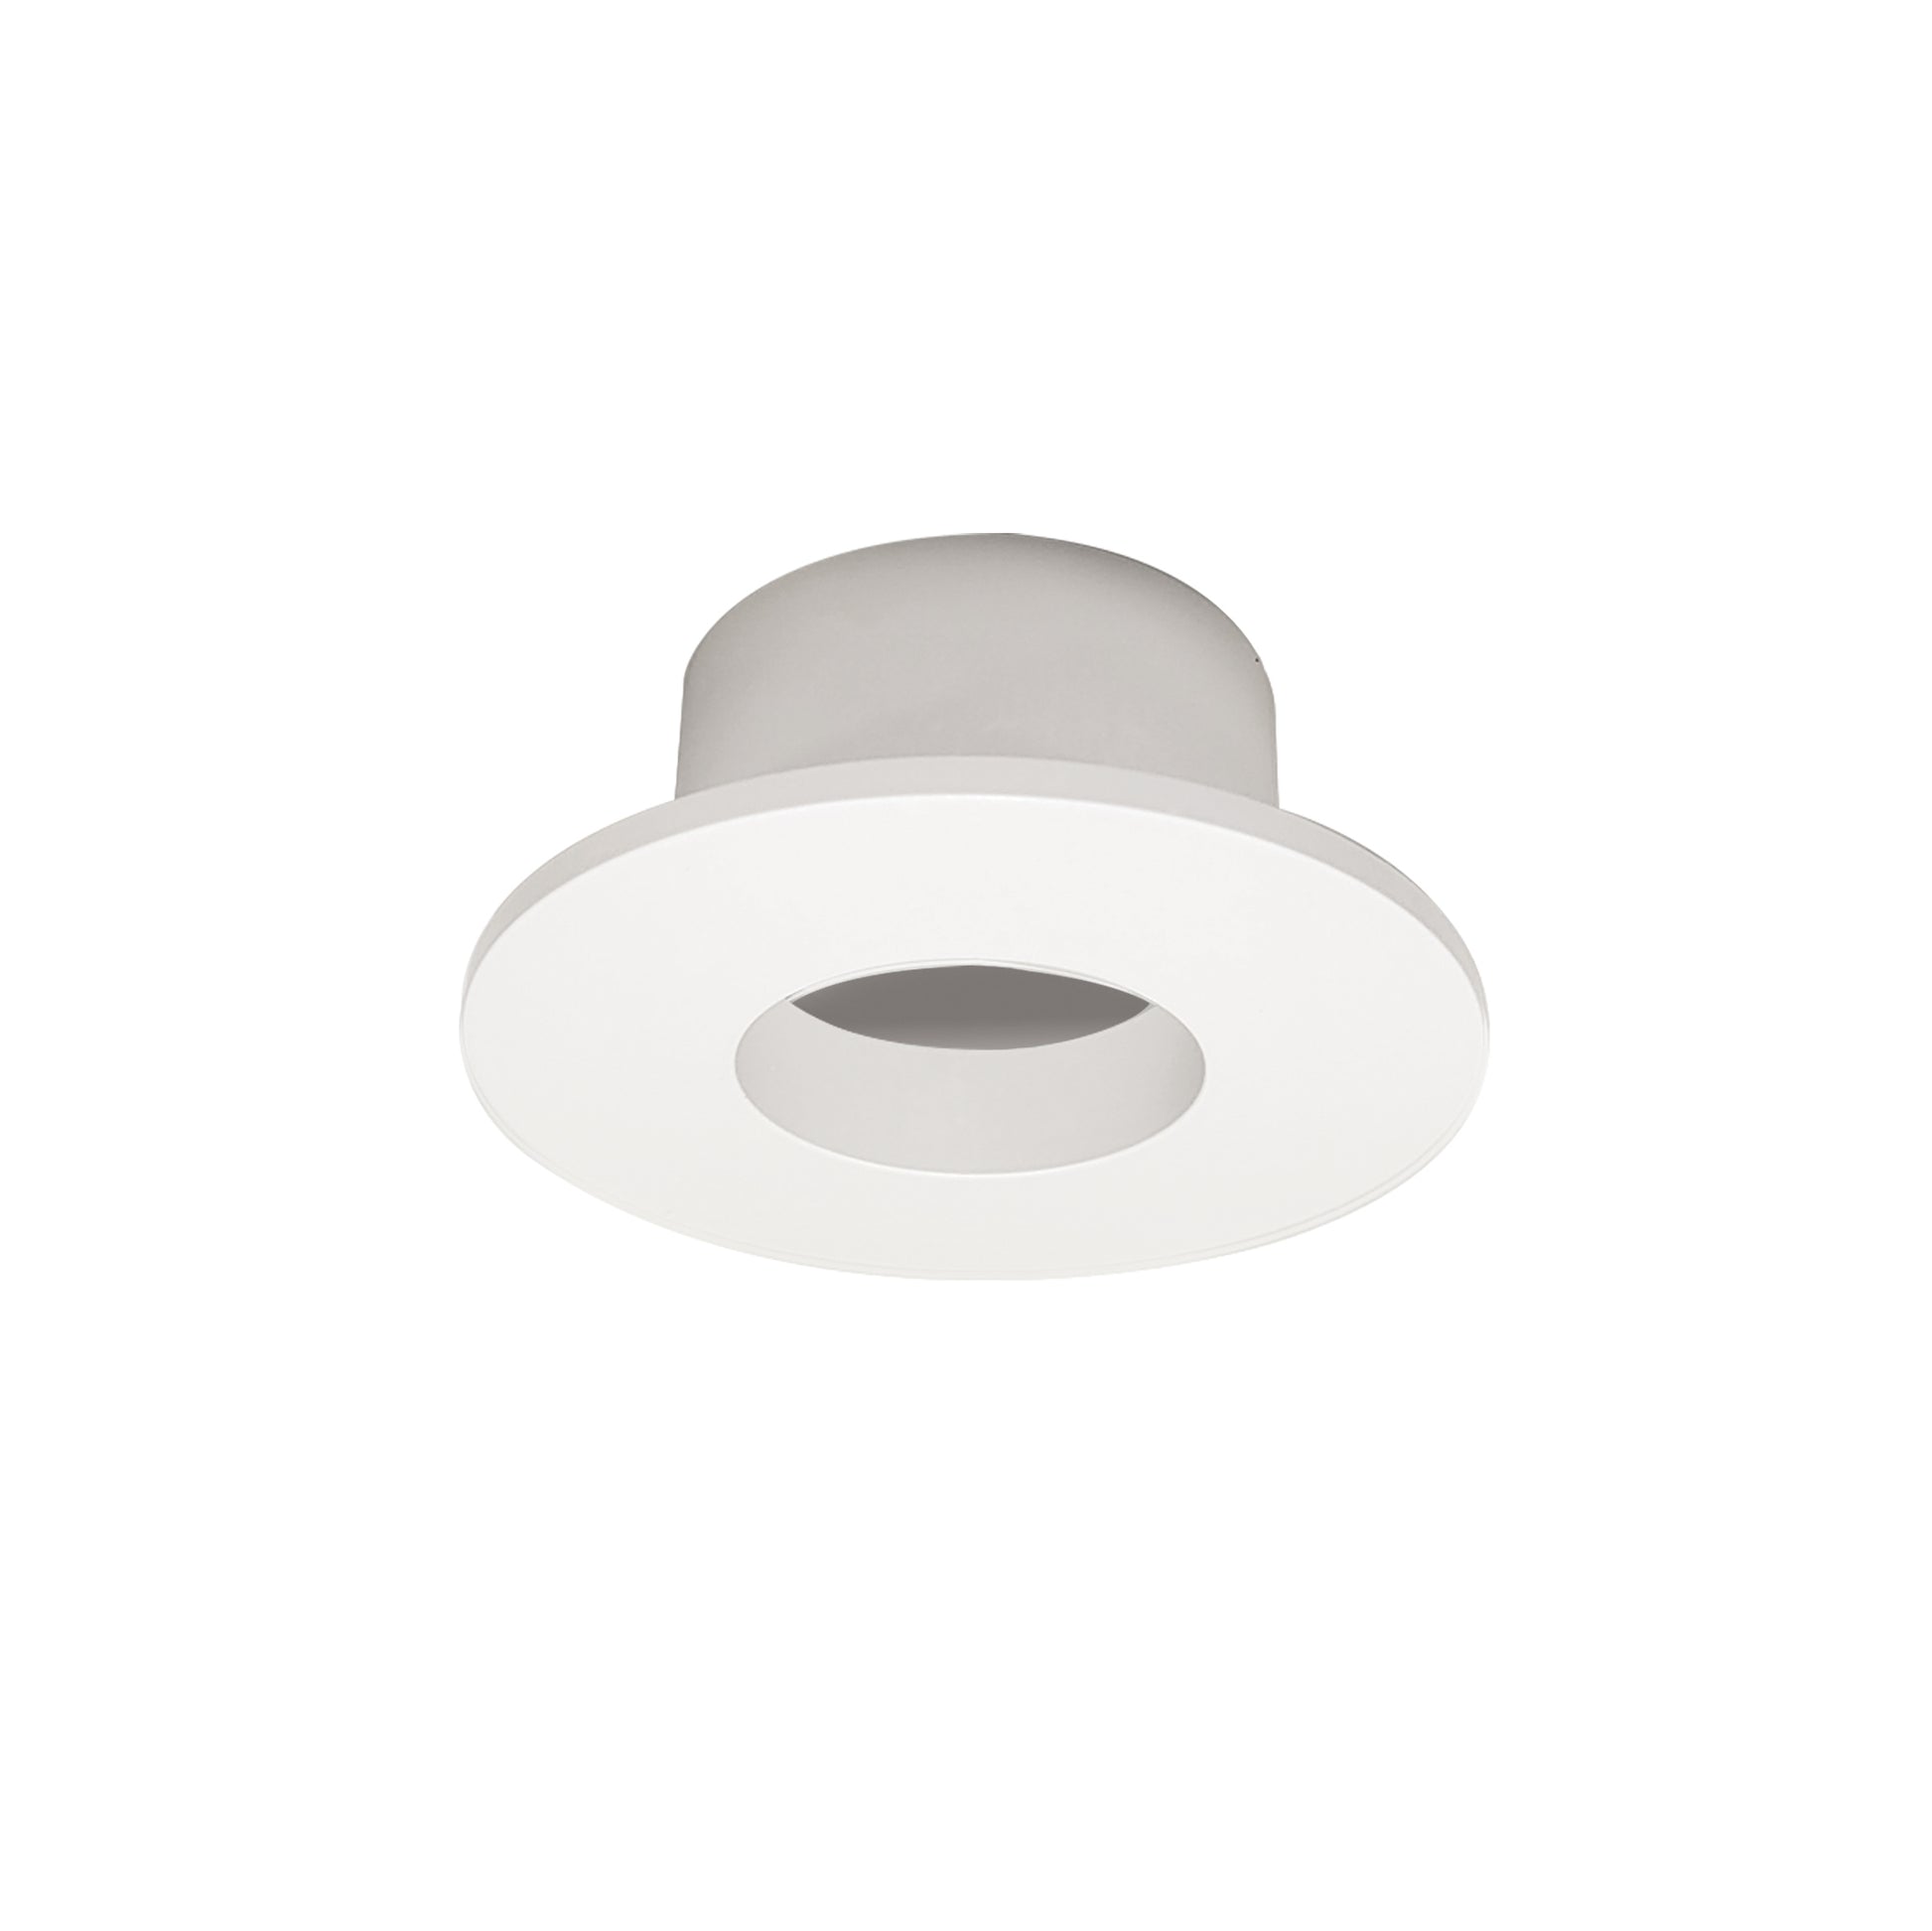 1-Inch Nora Lighting Iolite LED Recessed Downlight Trim -  Can-less Round Fixture 1